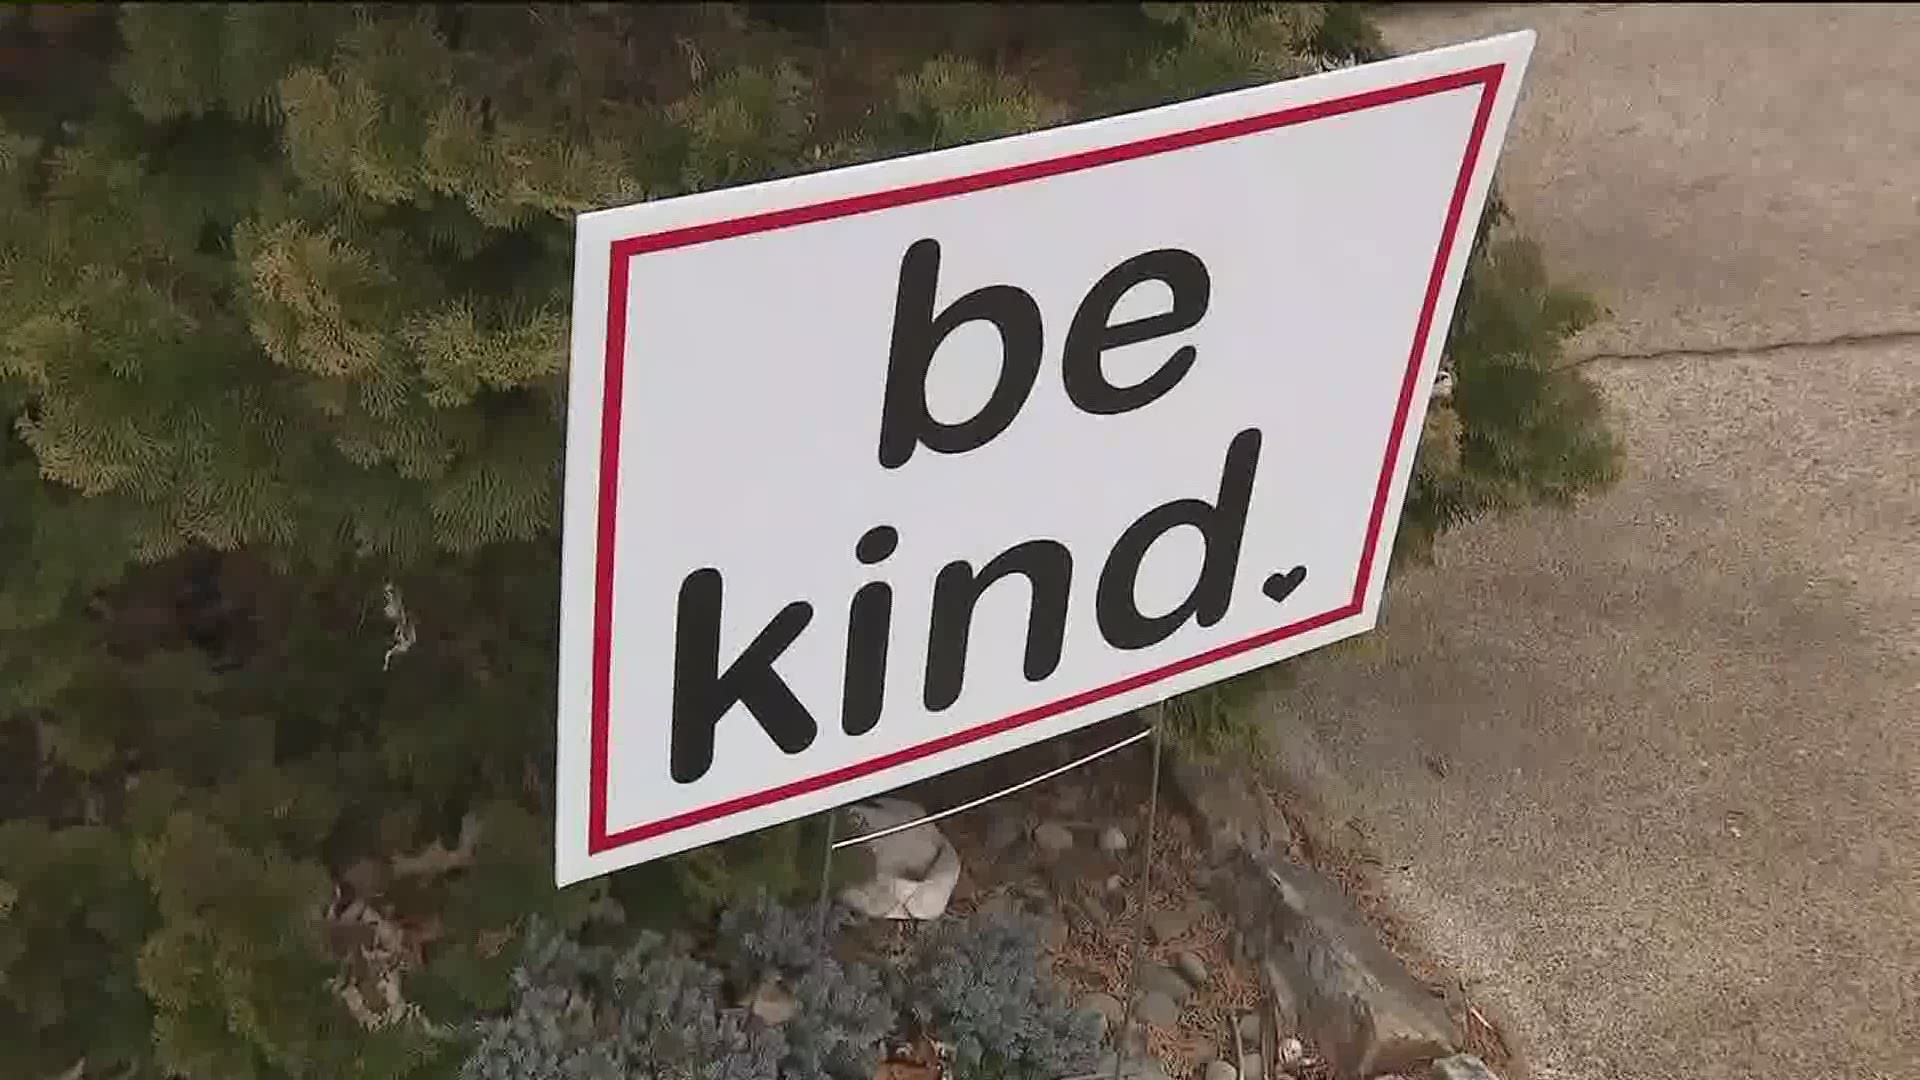 The Greater Susquehanna Valley United Way hopes "Be Kind" will have a big impact.